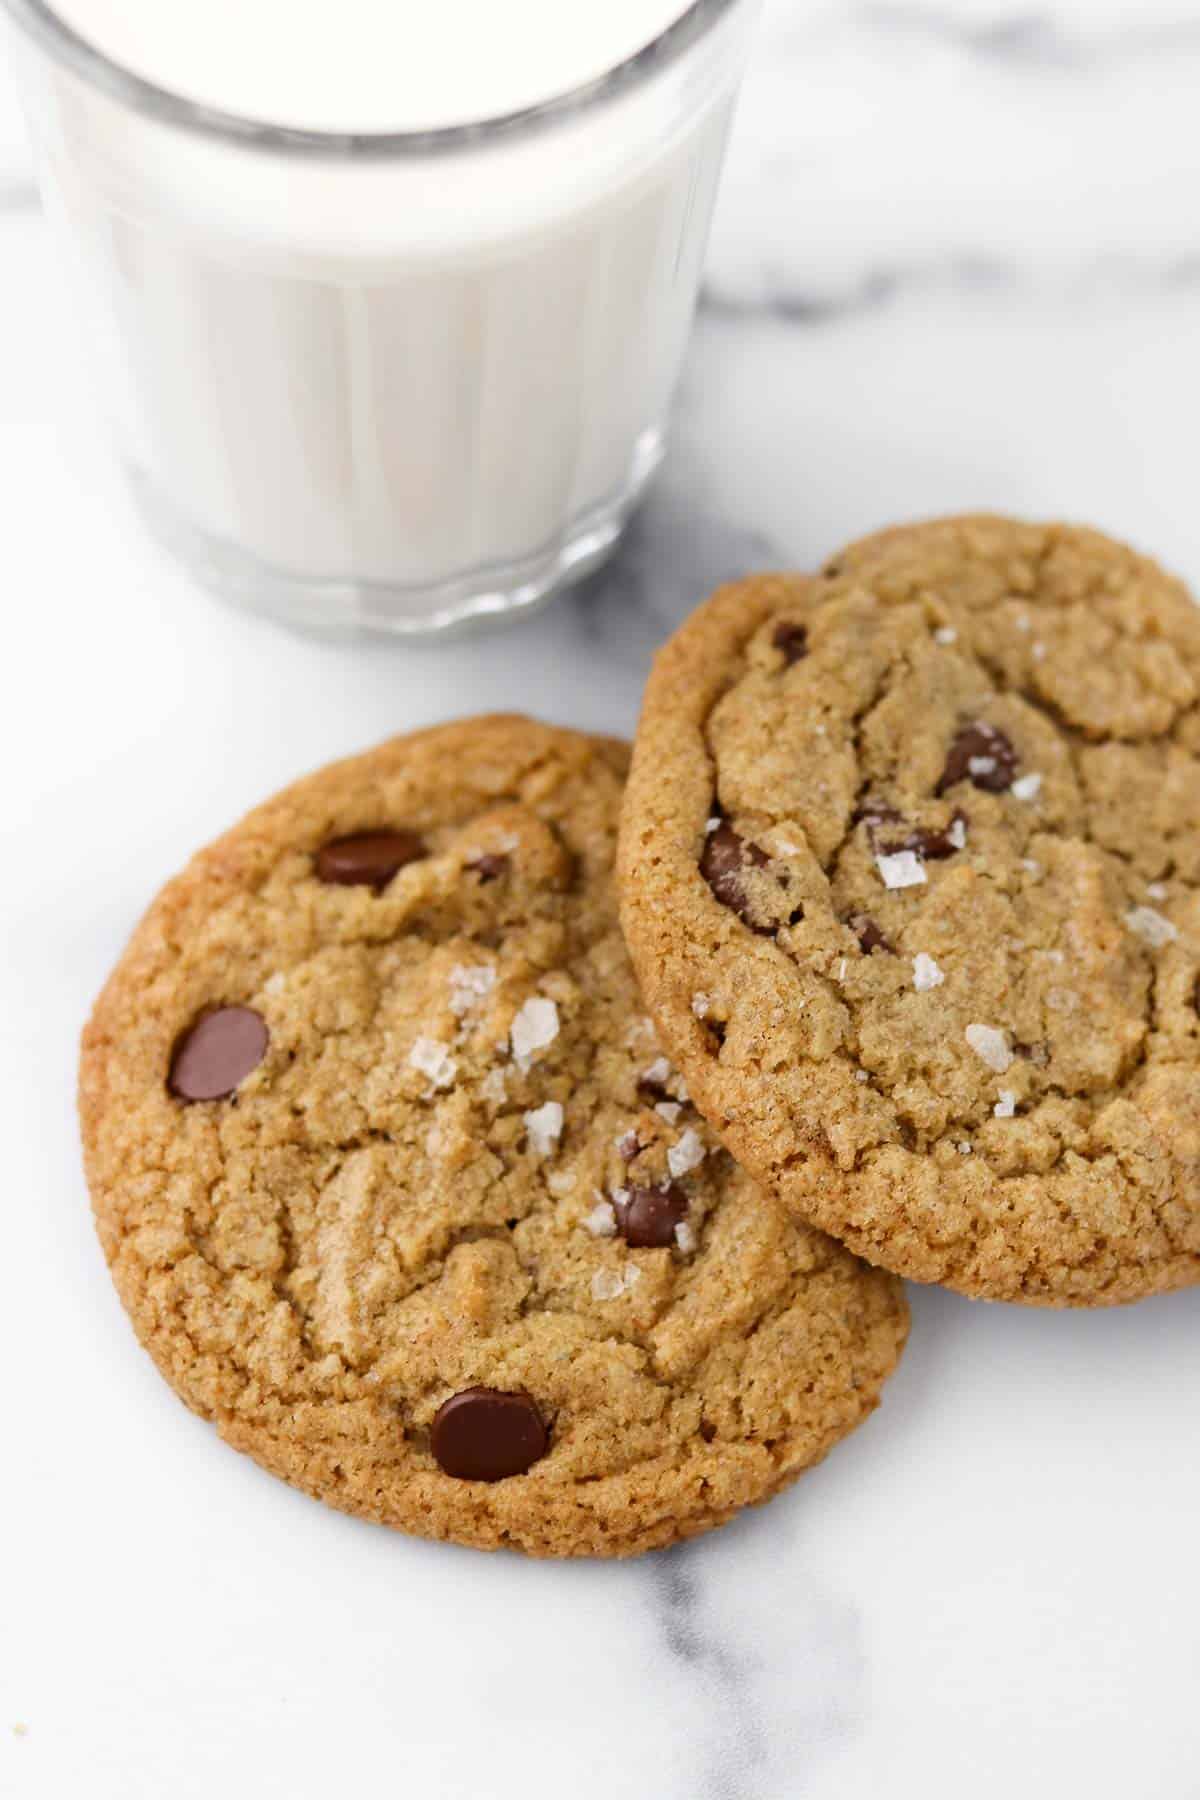 Two chocolate cookies on a marble surface next to a glass of milk.